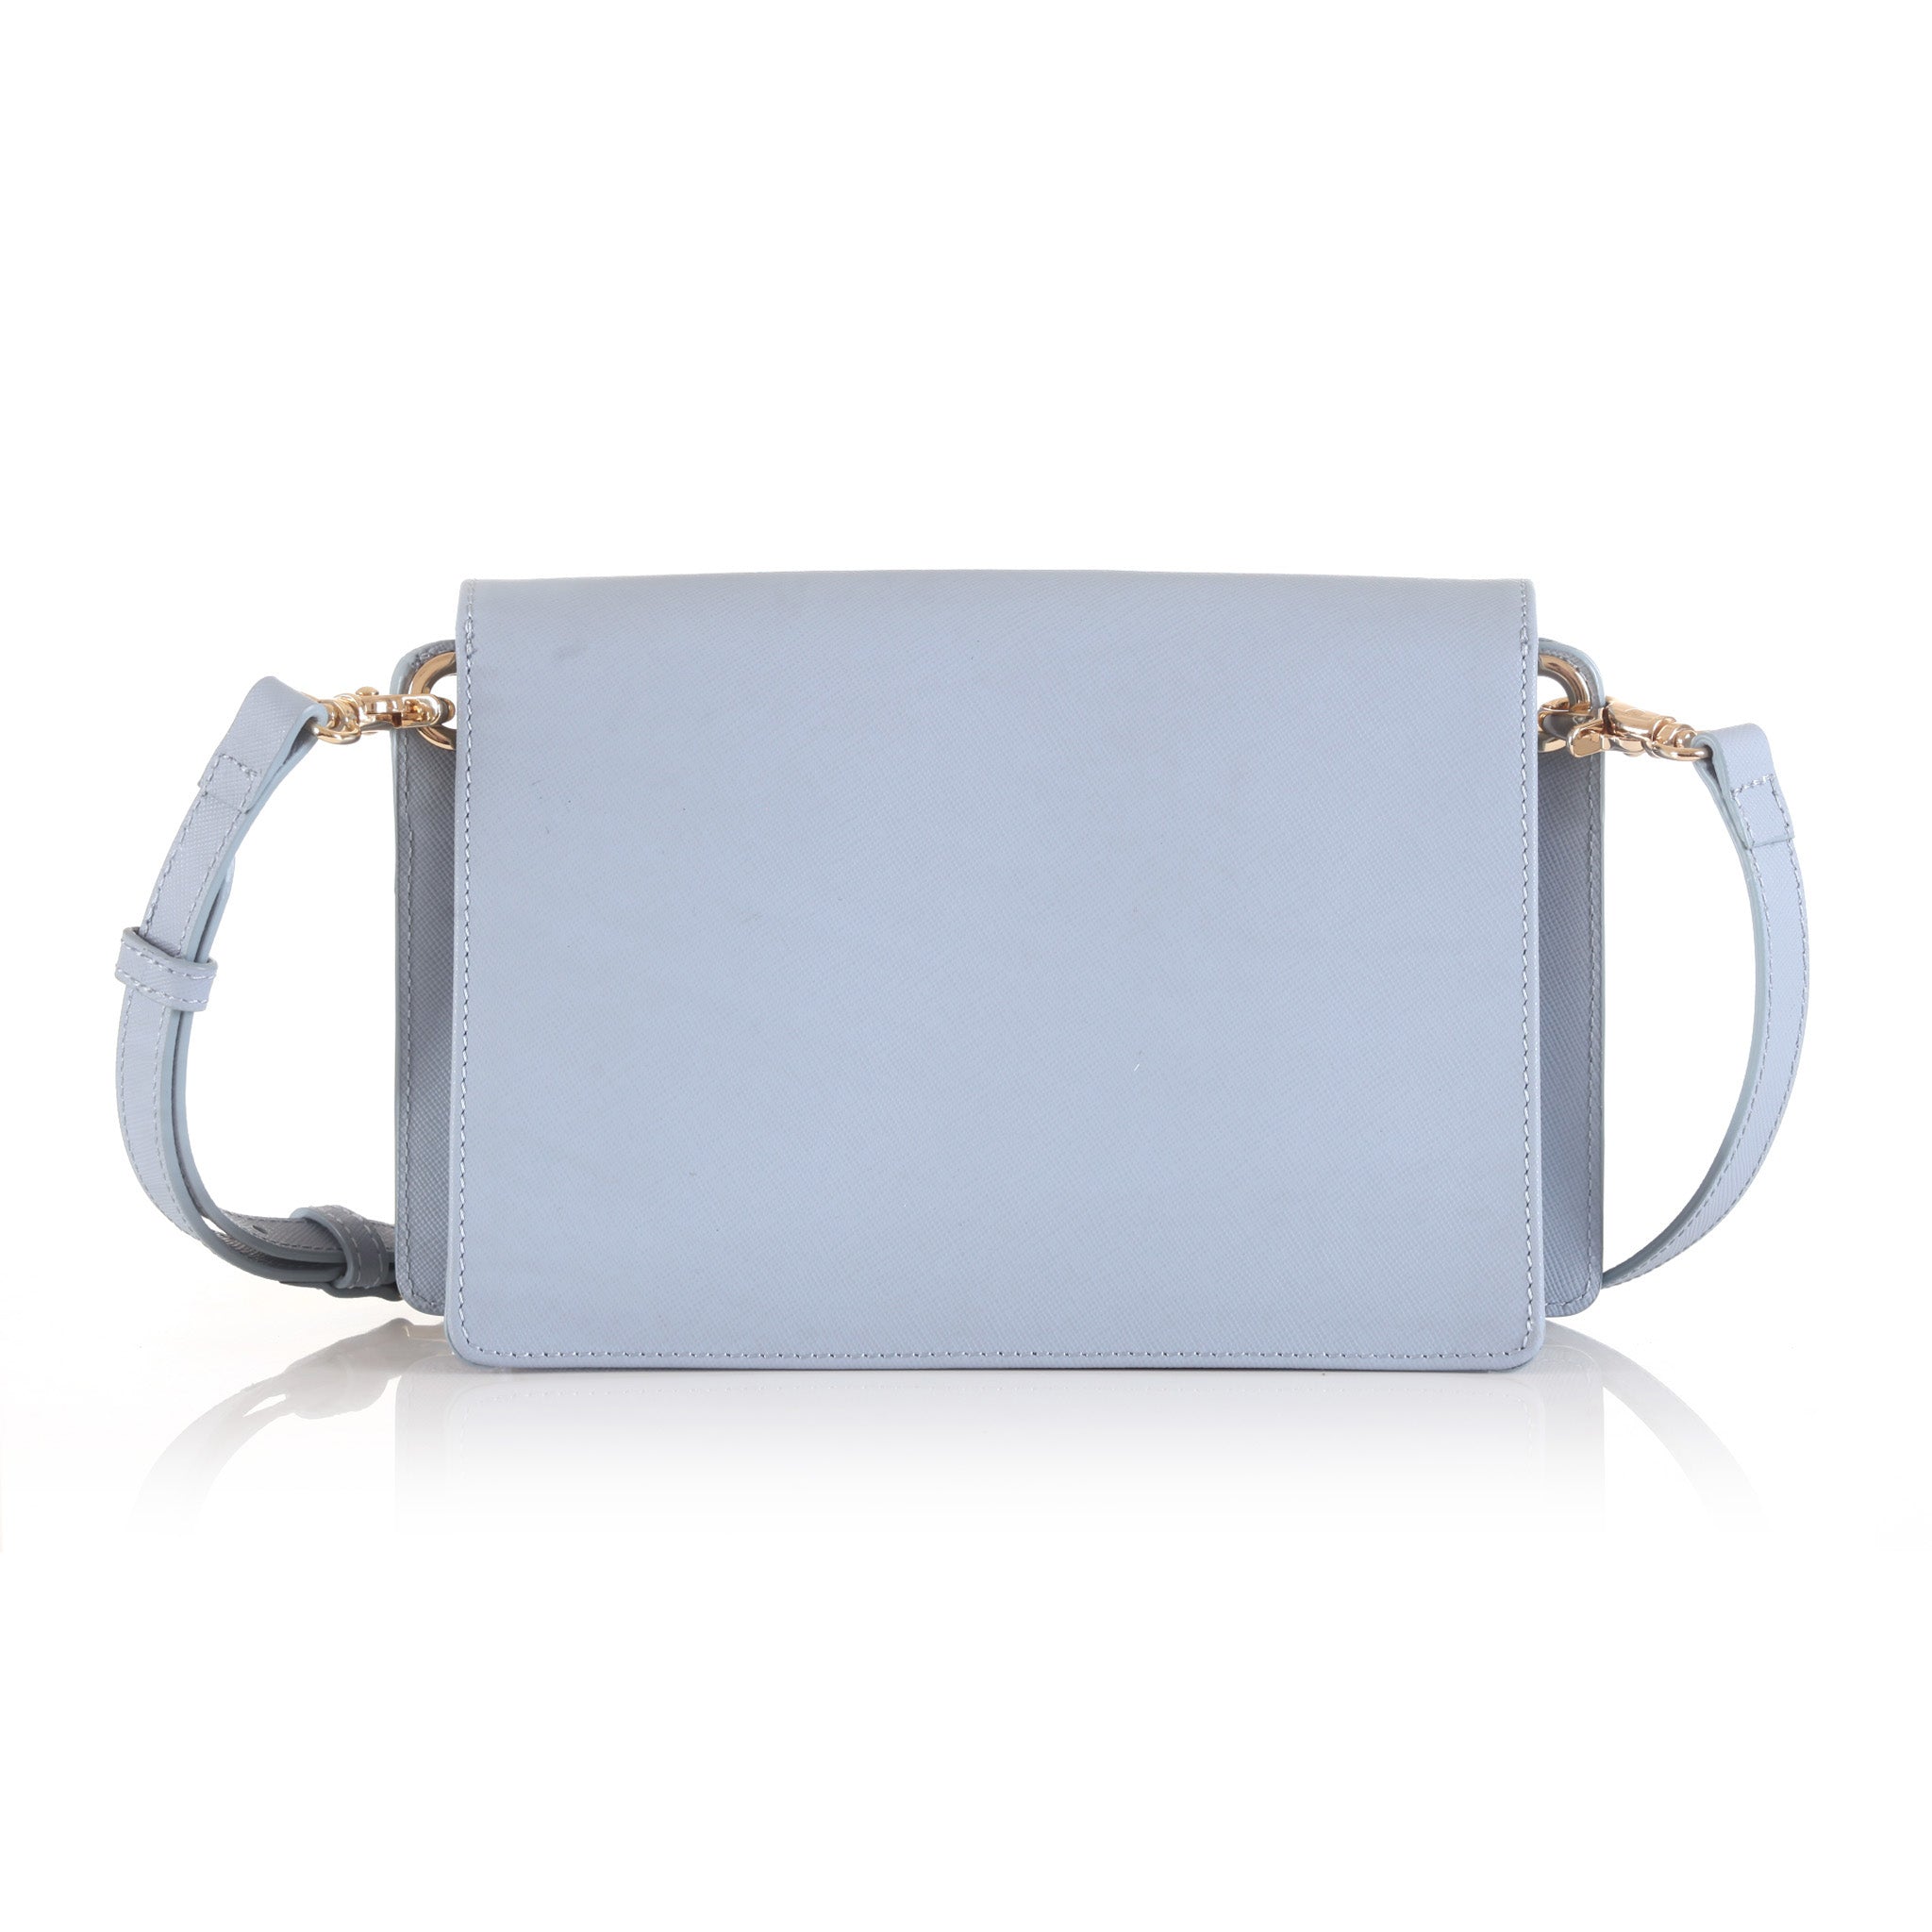 Rosy Front Flap Clutch